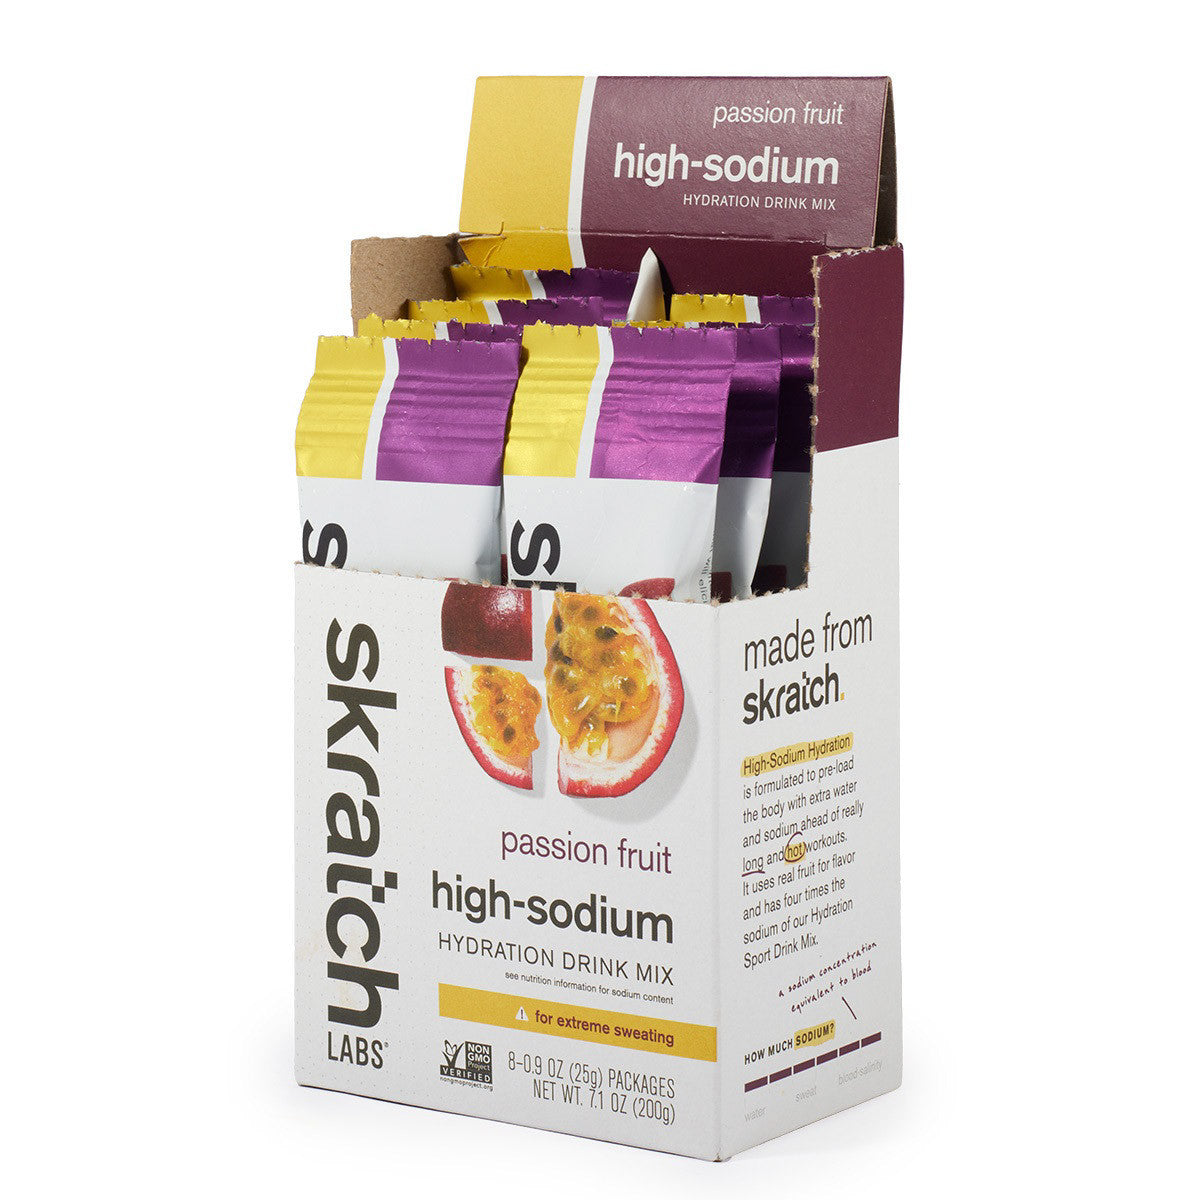 SKRATCH LABS - HIGH SODIUM HYDRATION DRINK MIX PASSION FRUIT SINGLE SERVING